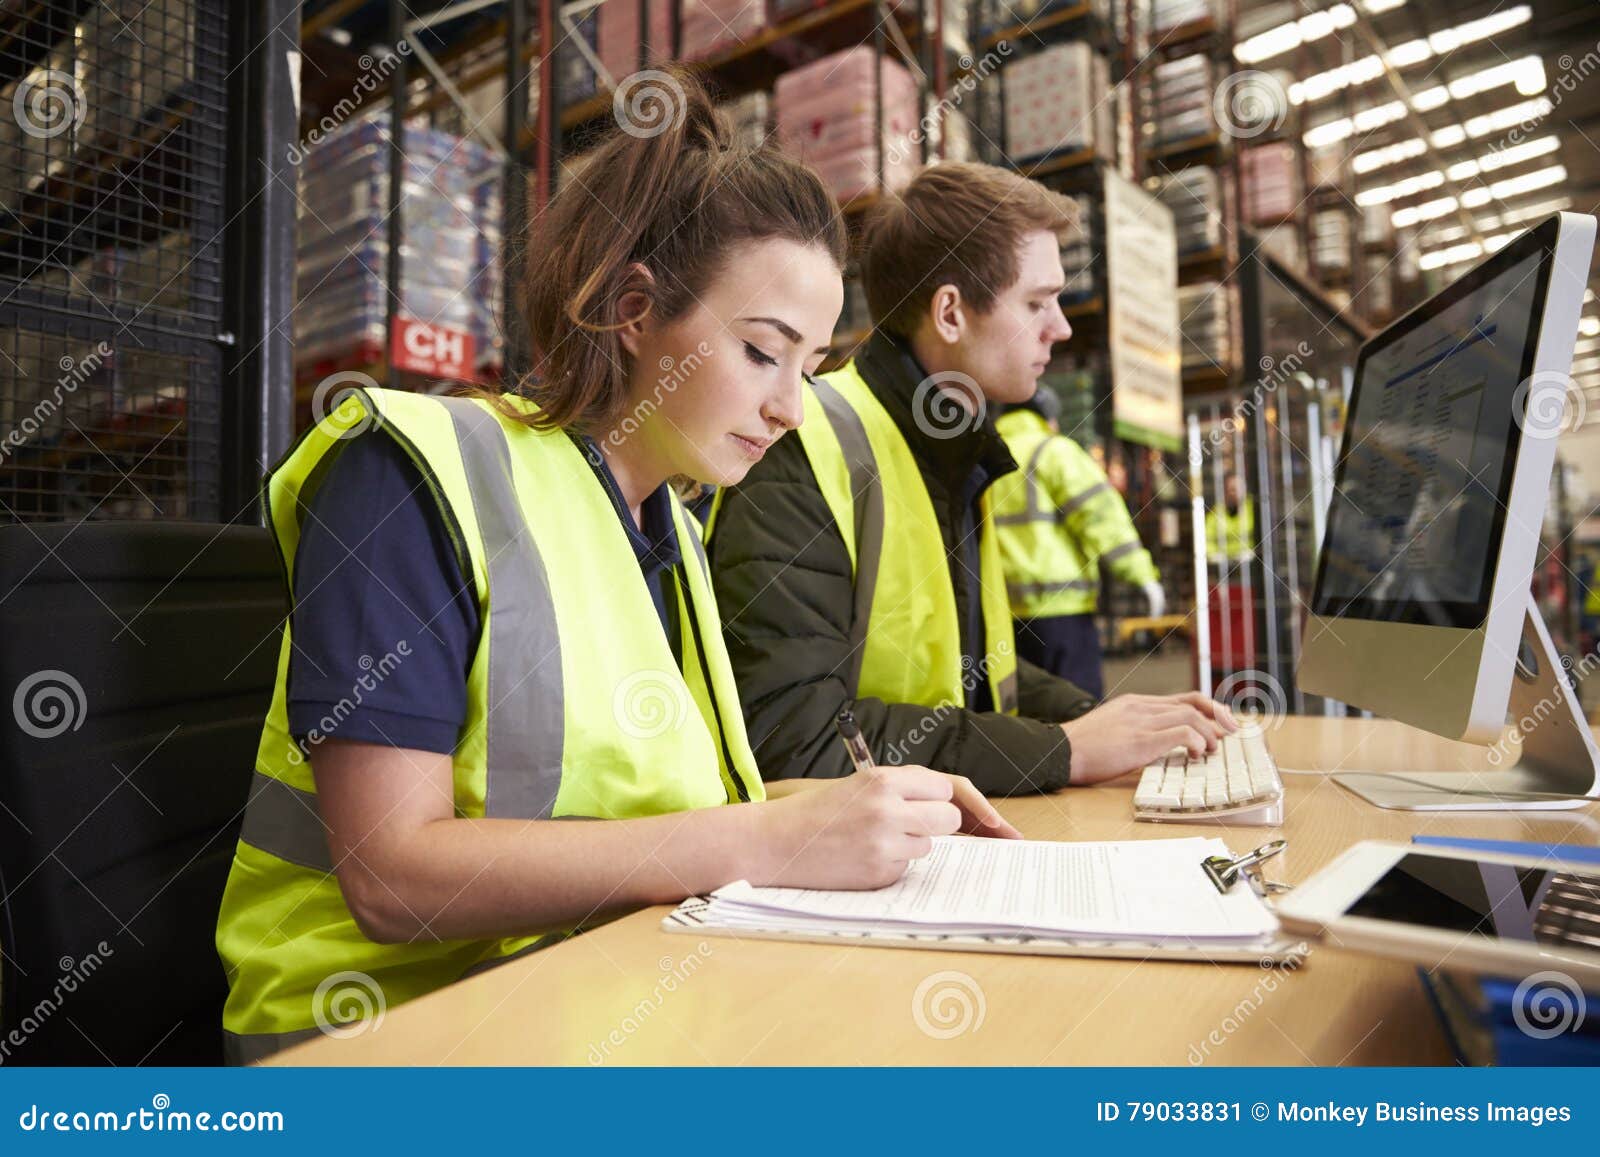 staff managing warehouse logistics in an on-site office